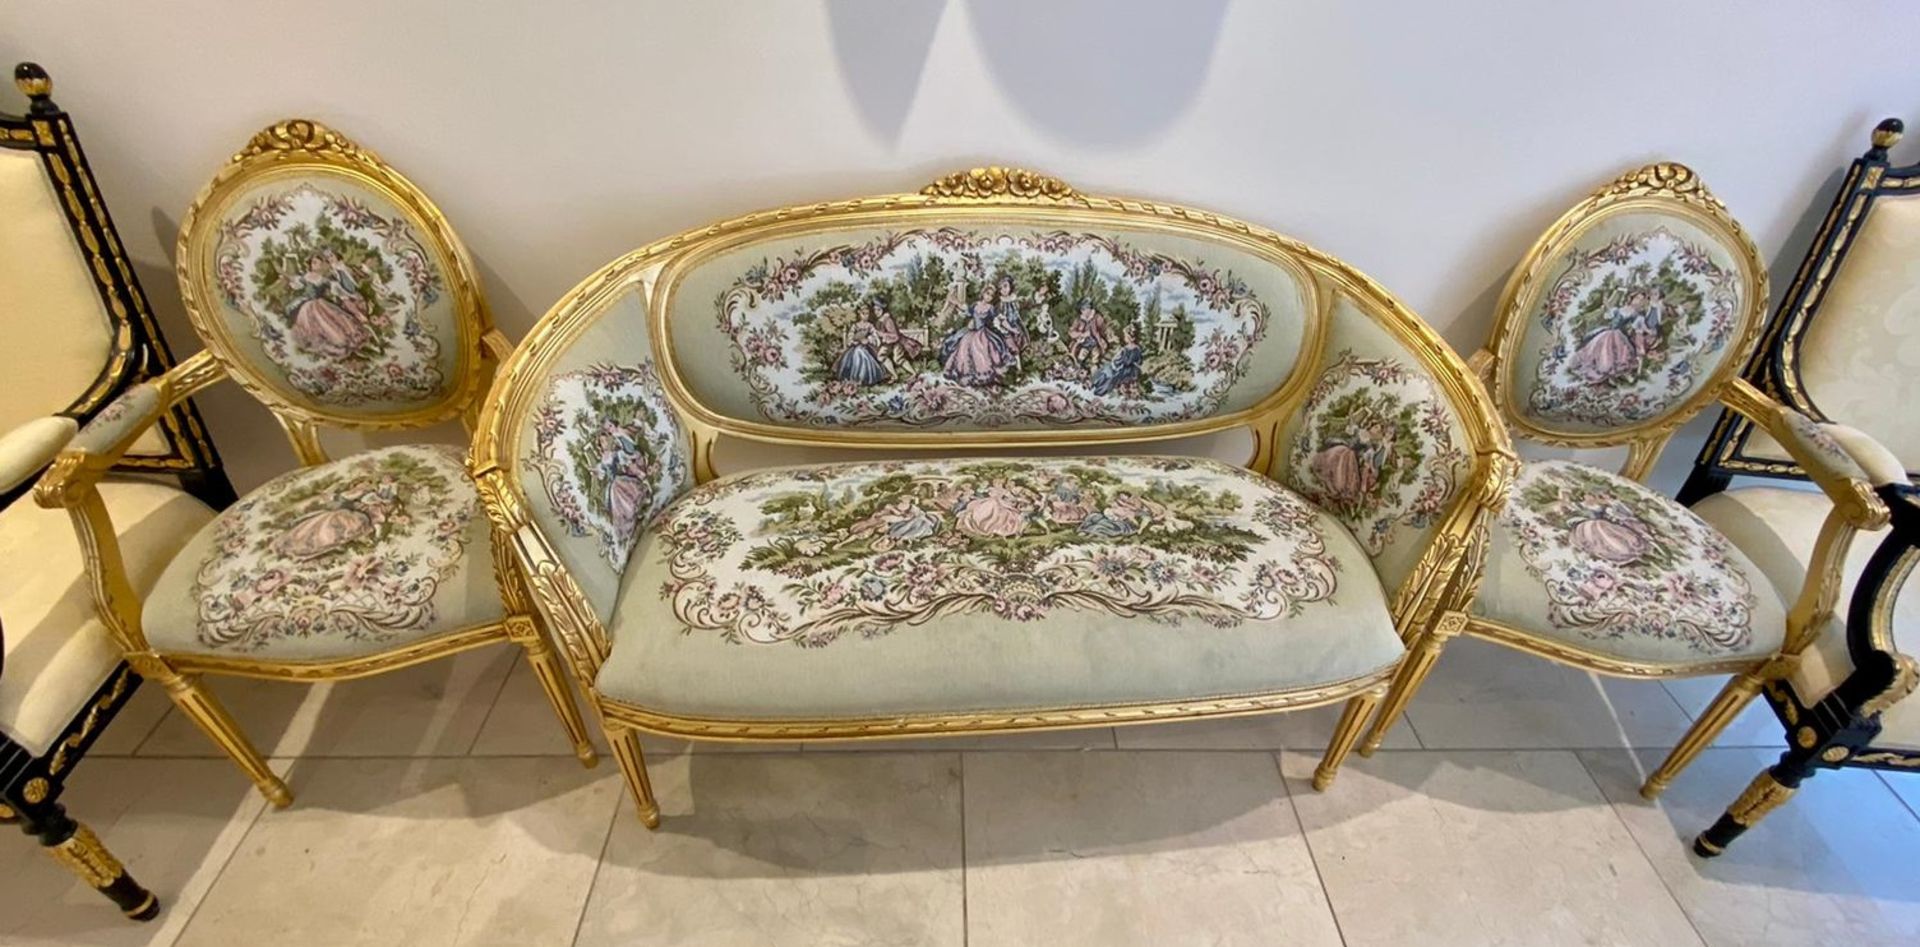 1 x Louis XVI French Style Three-Piece Salon Suite With Tapestry Upholstery and Carved Gold - Image 11 of 37